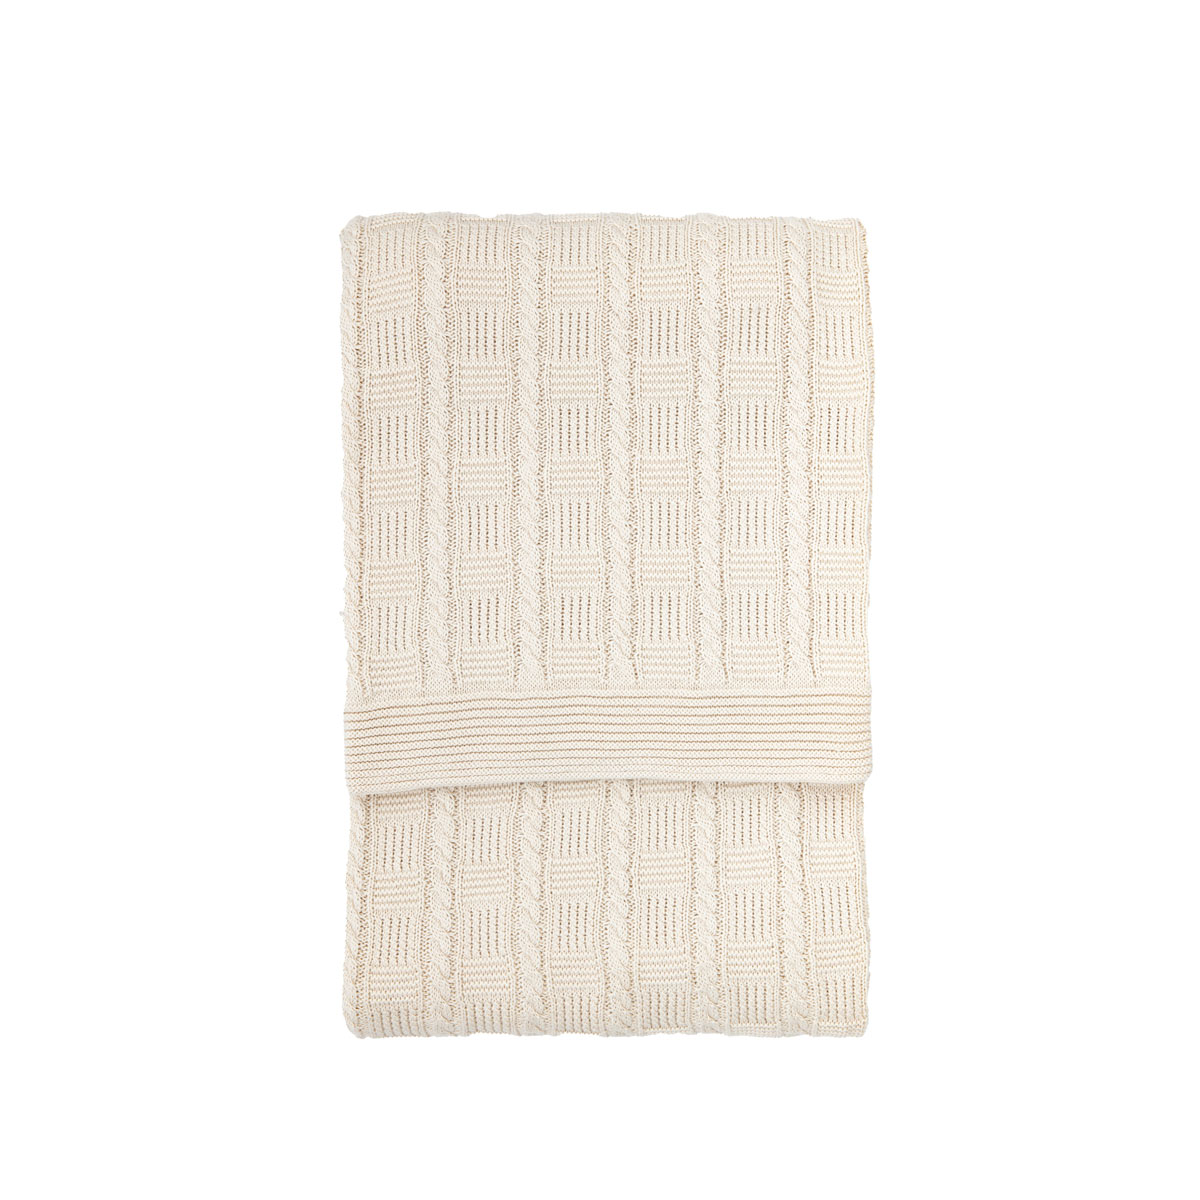 Cotton Cable Throw Cream 1300x1700mm